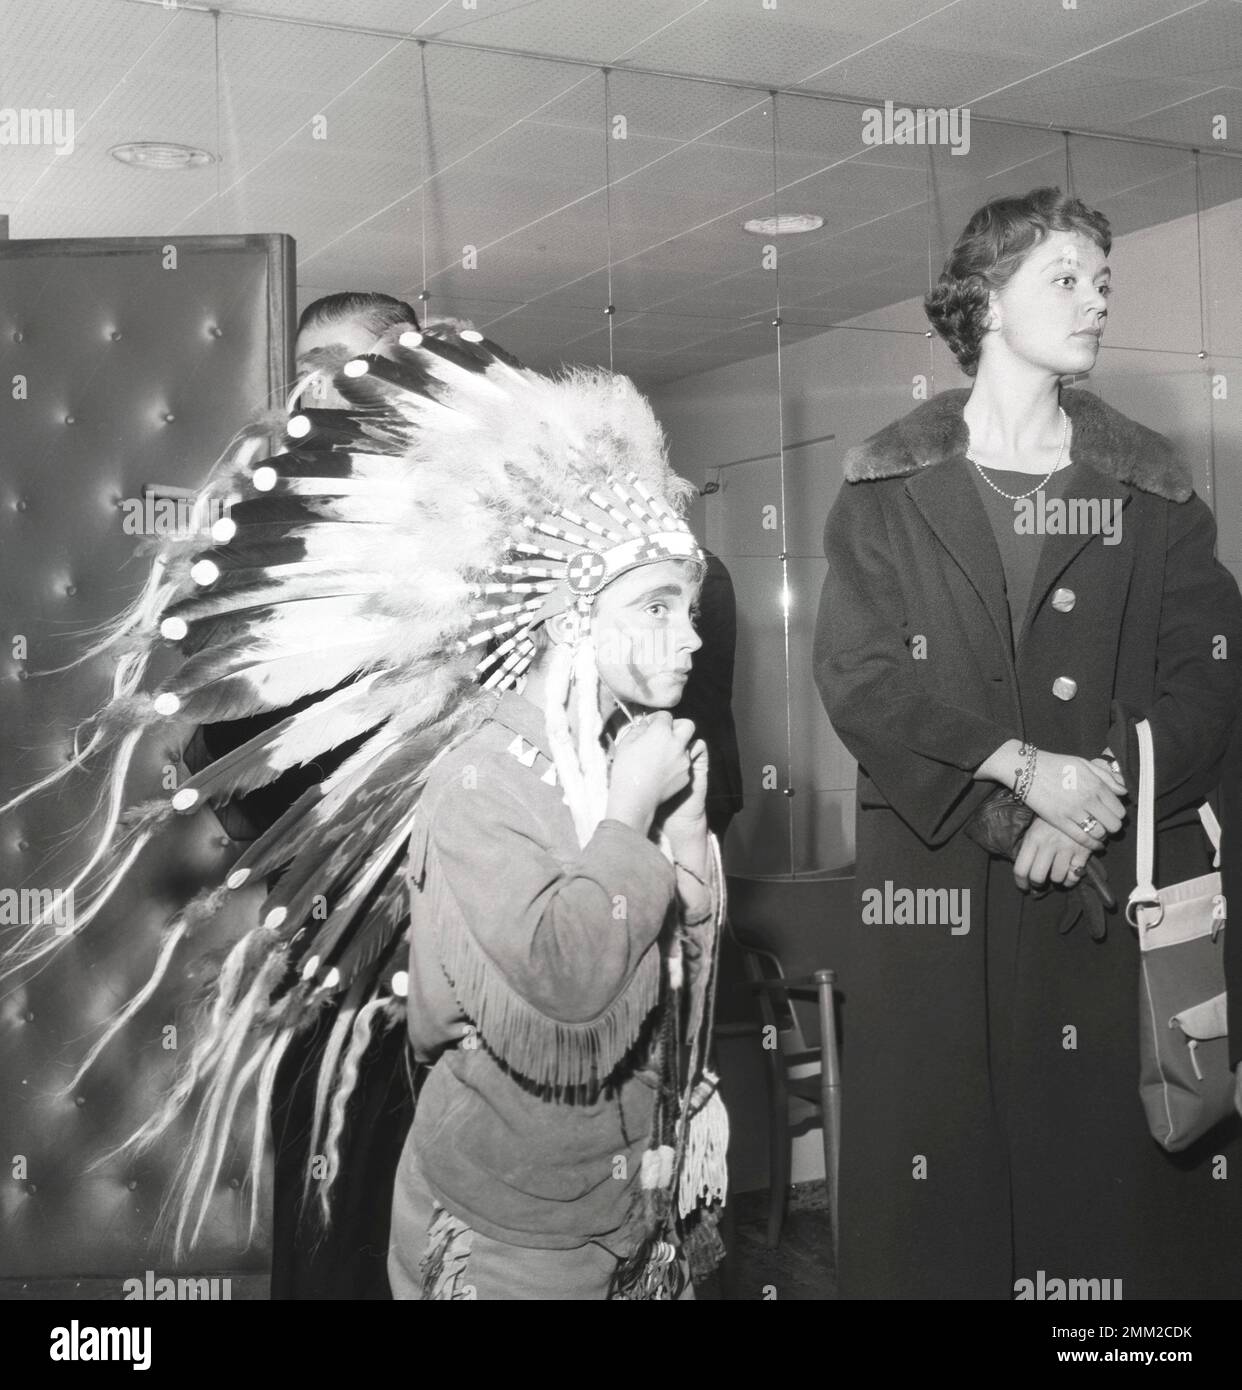 Carl XVI Gustaf, King of Sweden. Born 30 april 1946. Pictured wearing an native american costume at his school Broms 1958 together with his sister princess Birgitta. BV3-10 Stock Photo